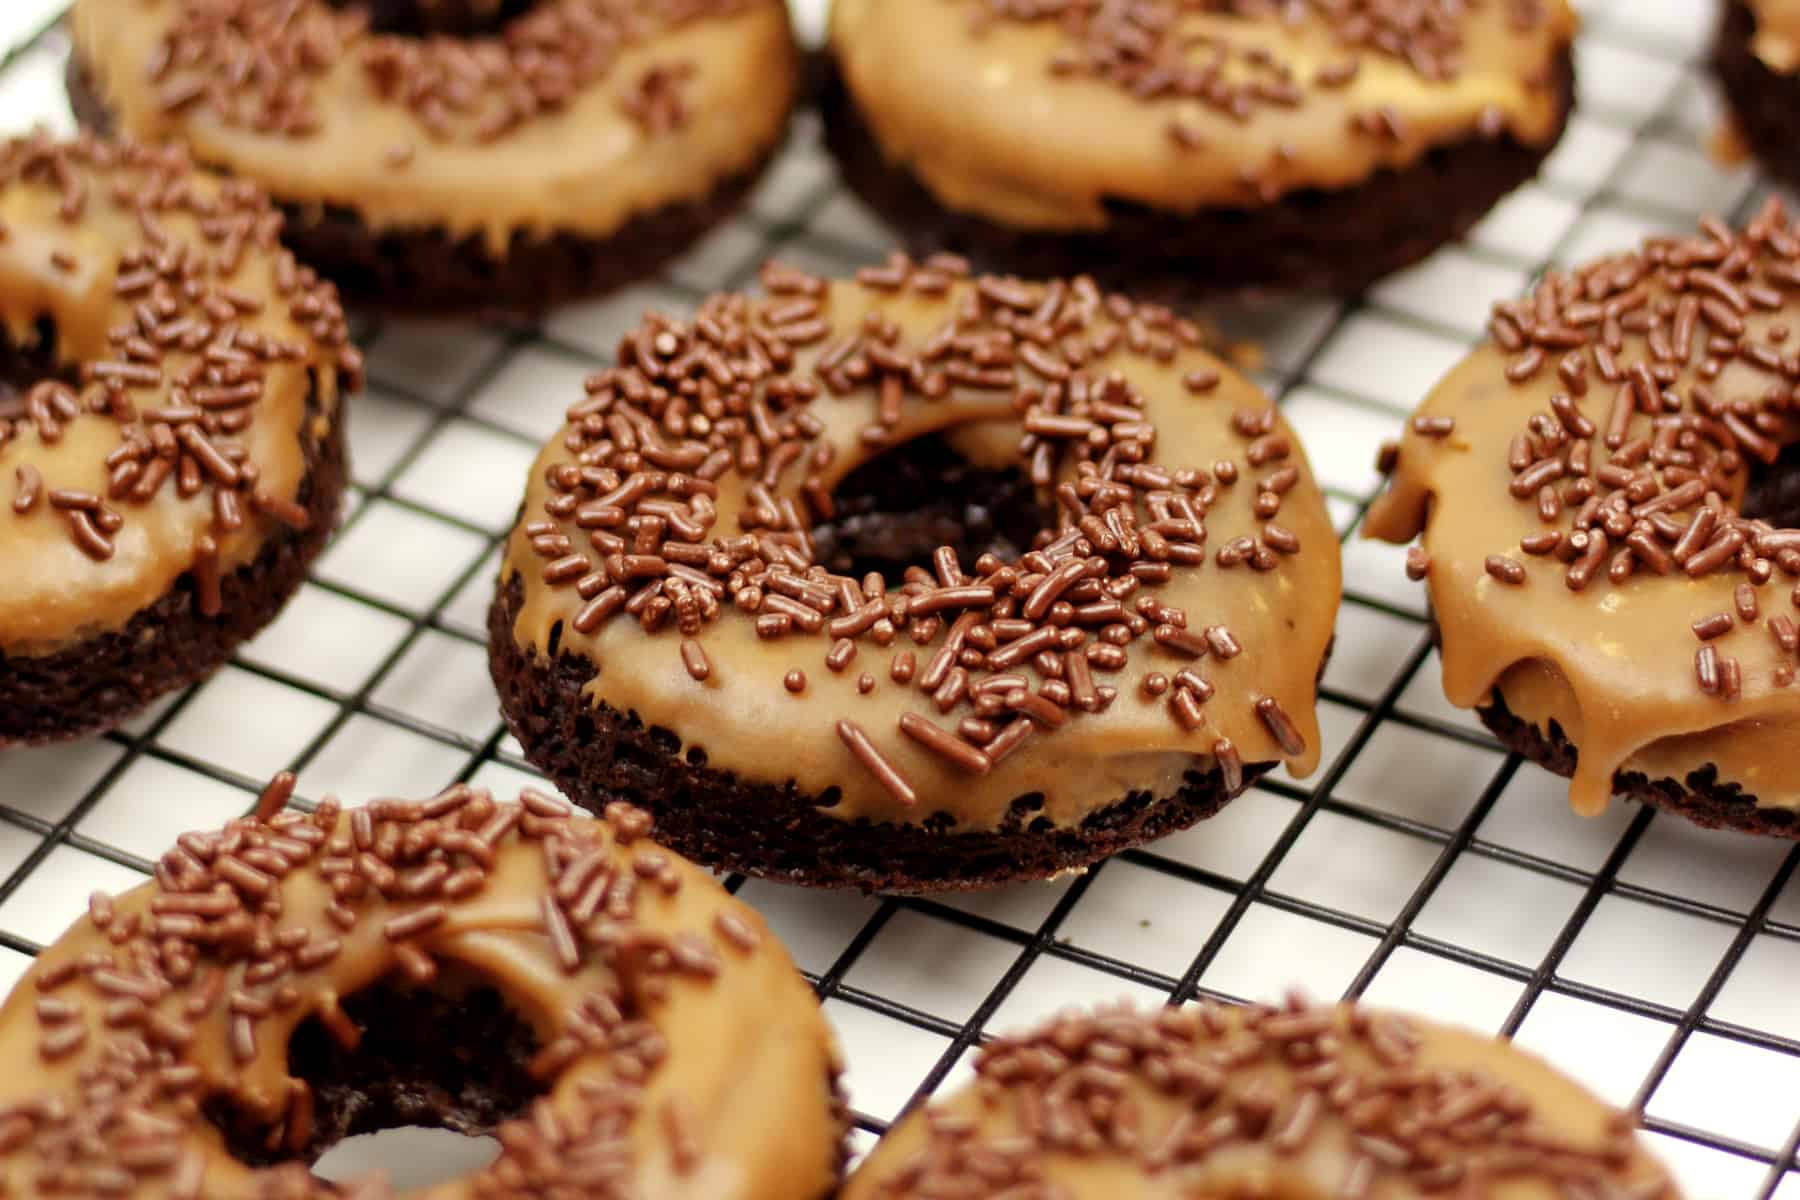 Donuts with chocolate icing and sprinkles on a cooling rack.